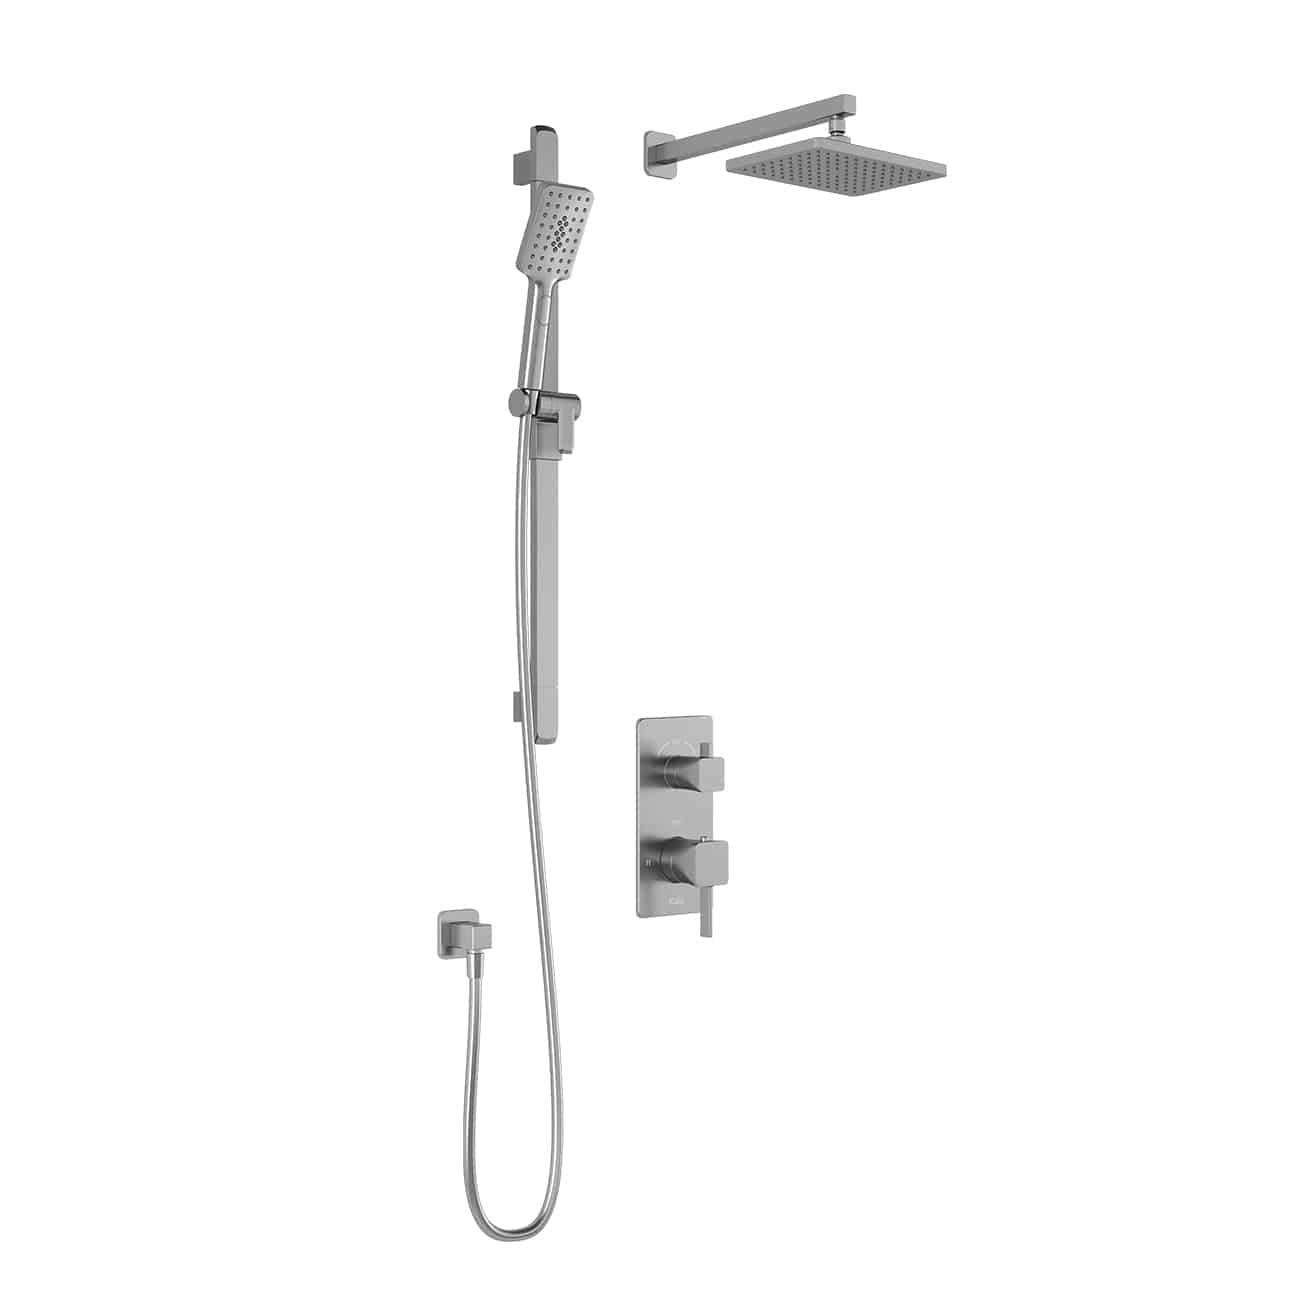 Kalia SquareOne TD2 (Valve Not Included) AQUATONIK T/P with Diverter Shower System with 10-1/4" Shower Head and Wall Arm- Chrome